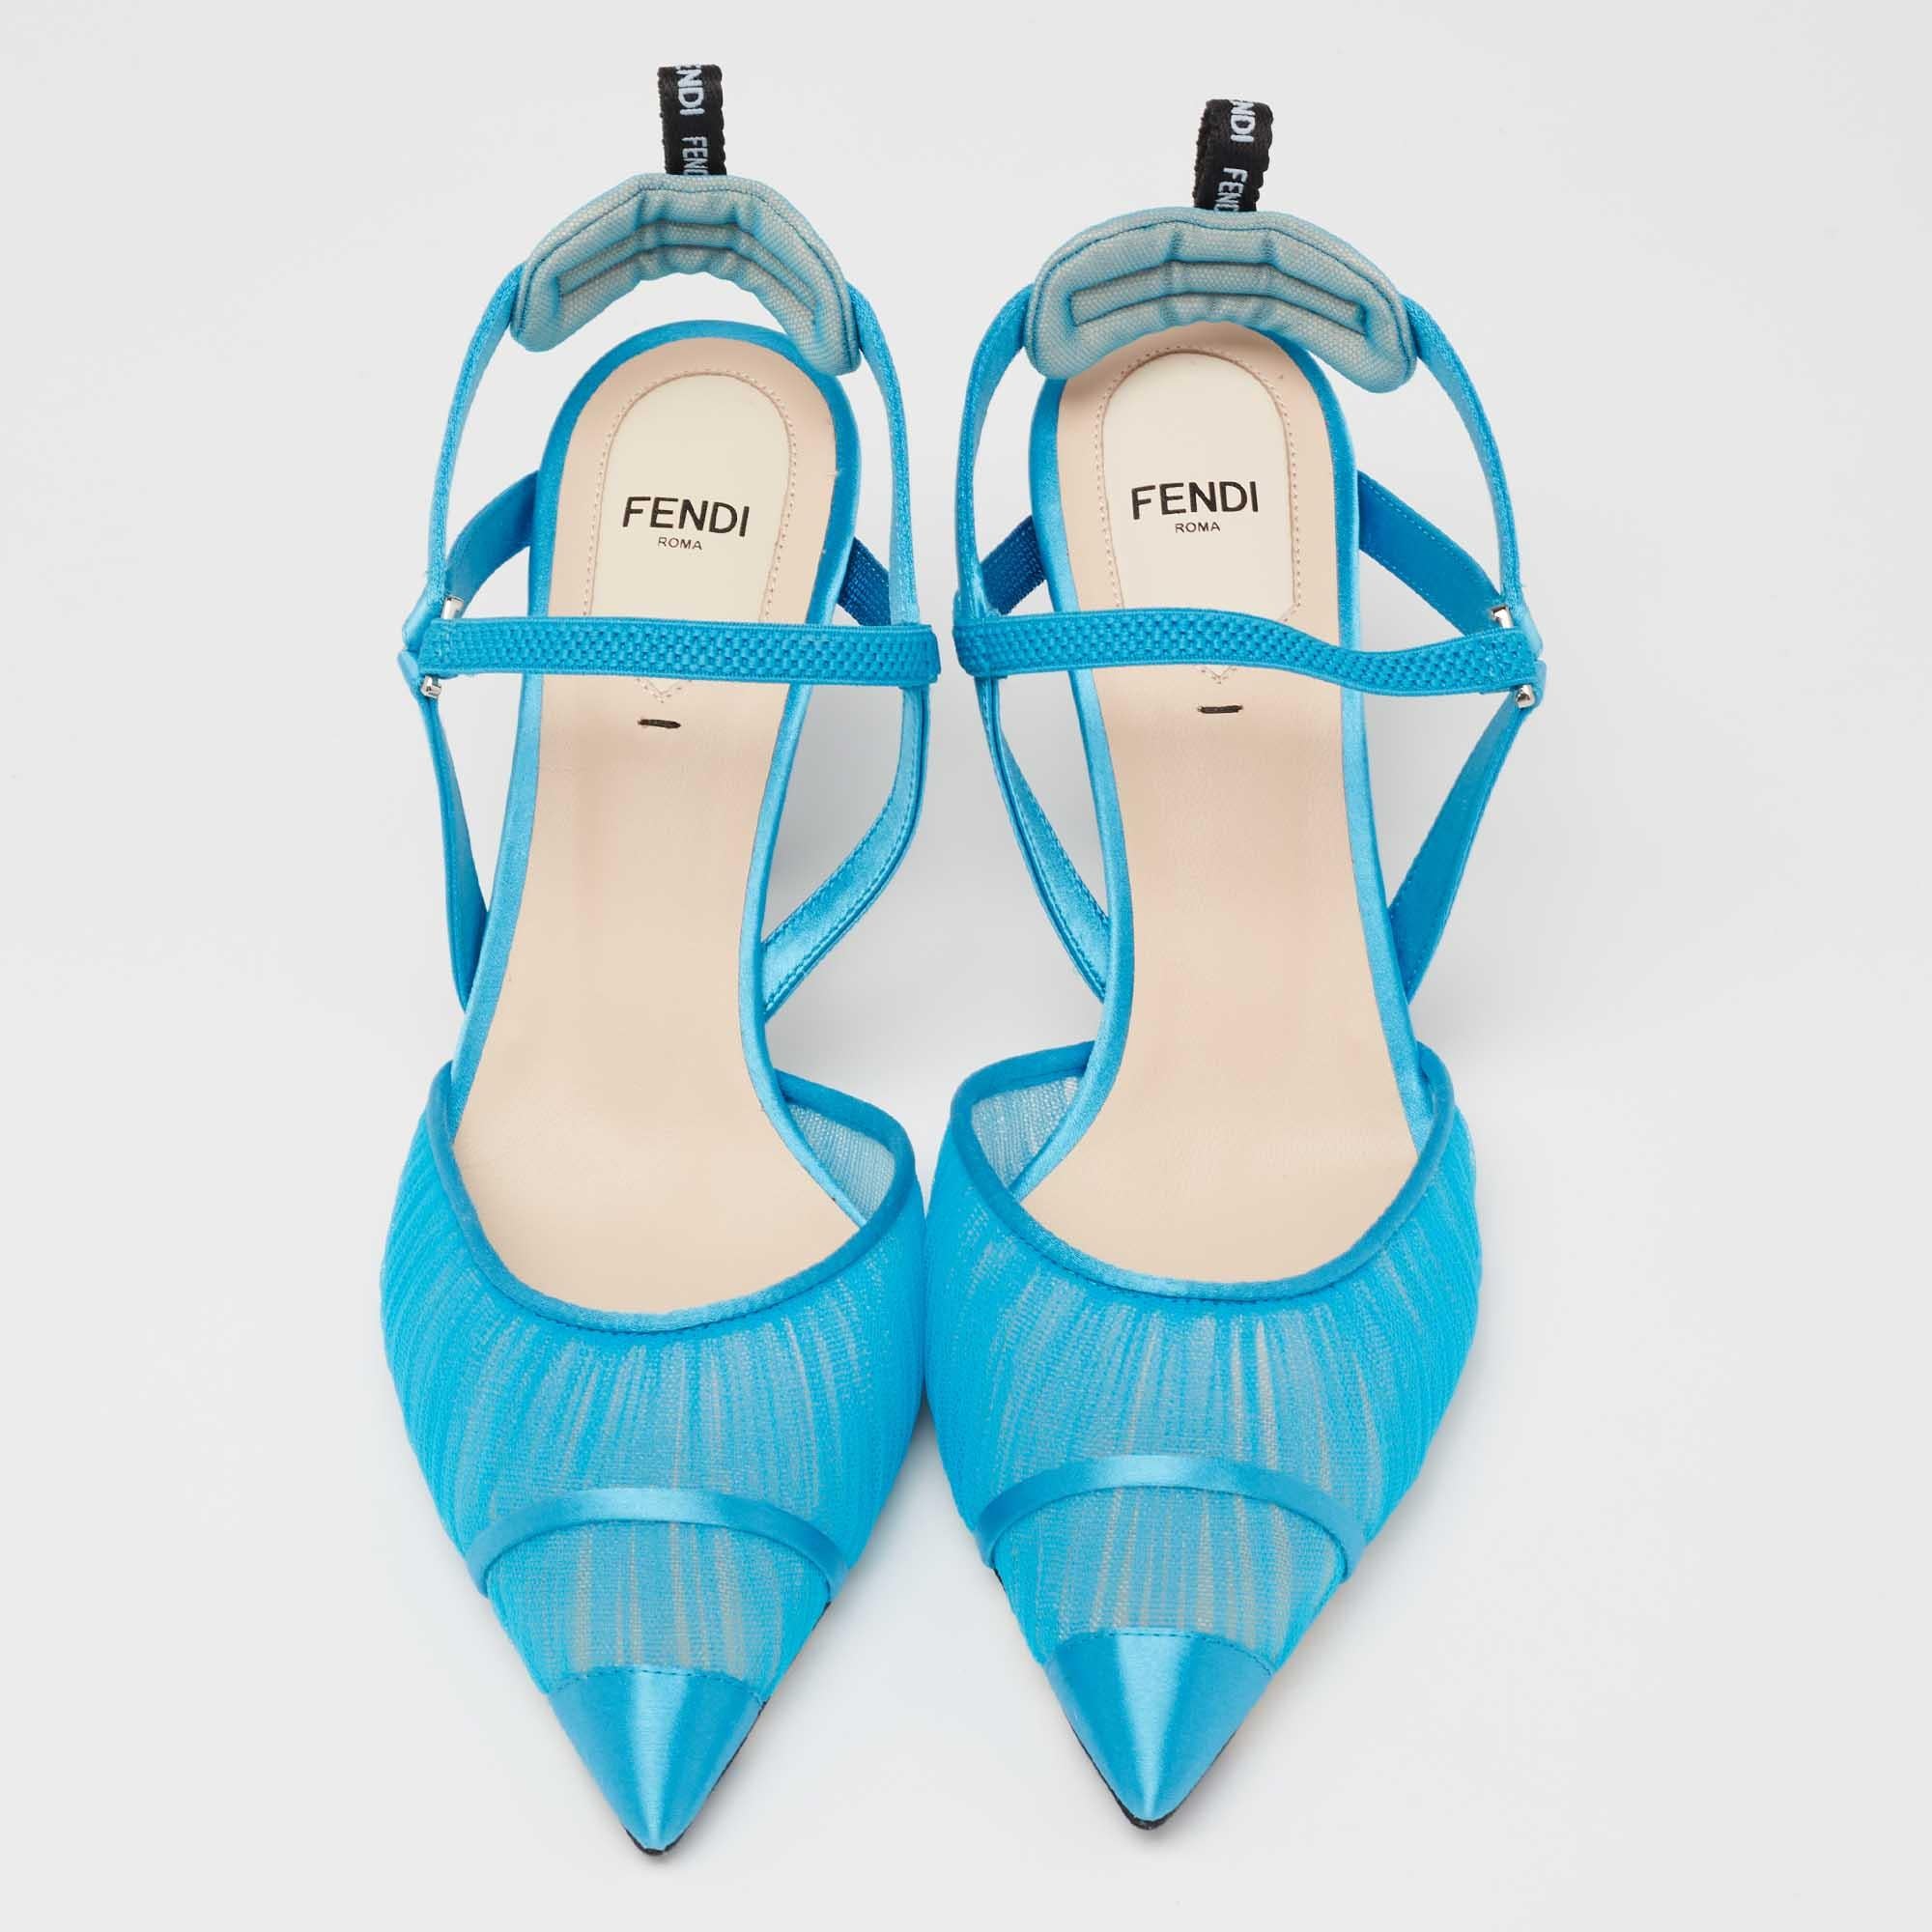 Feminine and luxe, these all-in-ones Colibri pumps by Fendi were first introduced in their SS18 collection, and since then, they are loved by celebrities and influencers worldwide. Crafted from quality materials, the Lite iteration features pointed